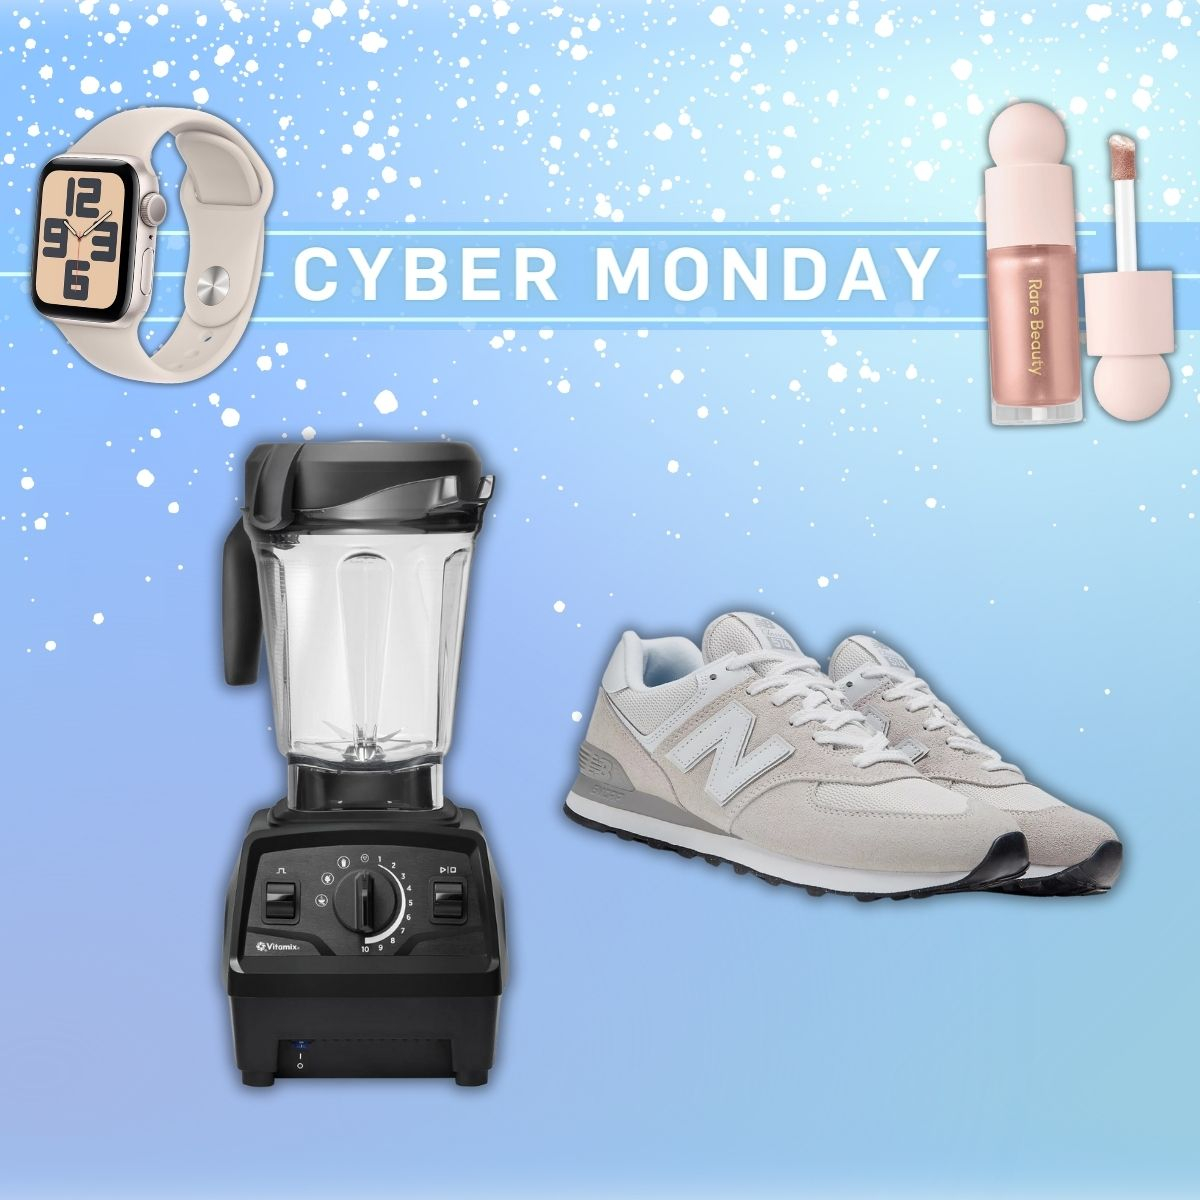 Nordstrom's Cyber Monday sale ends soon — 11 best deals to shop